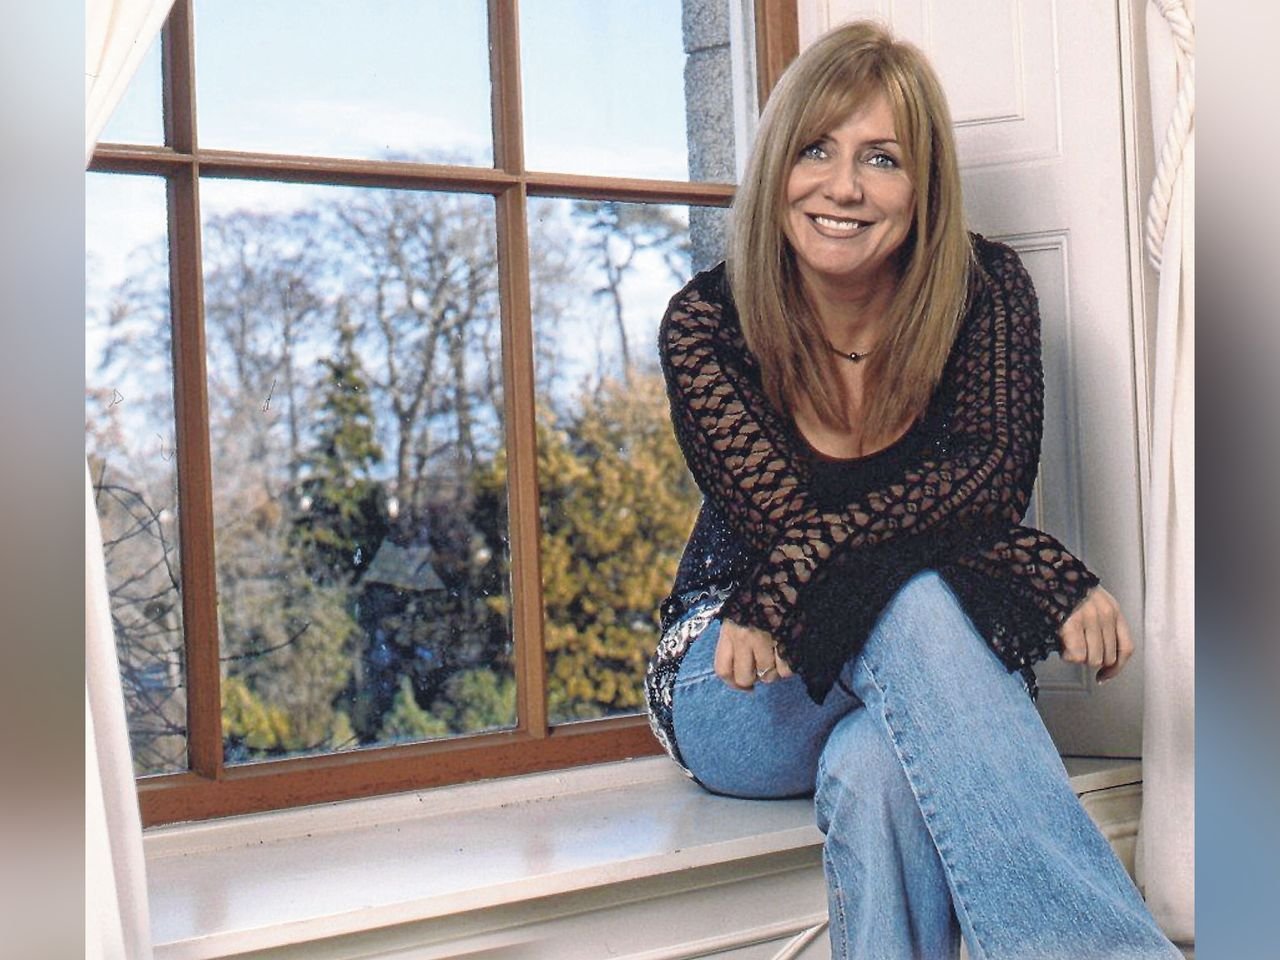 In Conversation with 𝗙𝗿𝗮𝗻𝗰𝗲𝘀 𝗕𝗹𝗮𝗰𝗸

📆 Saturday 4th May

Senator @francesblack1  is a prominent Irish singer-songwriter, activist, and politician. Born in Dublin, she began her music career in the 1980s, achieving international success as